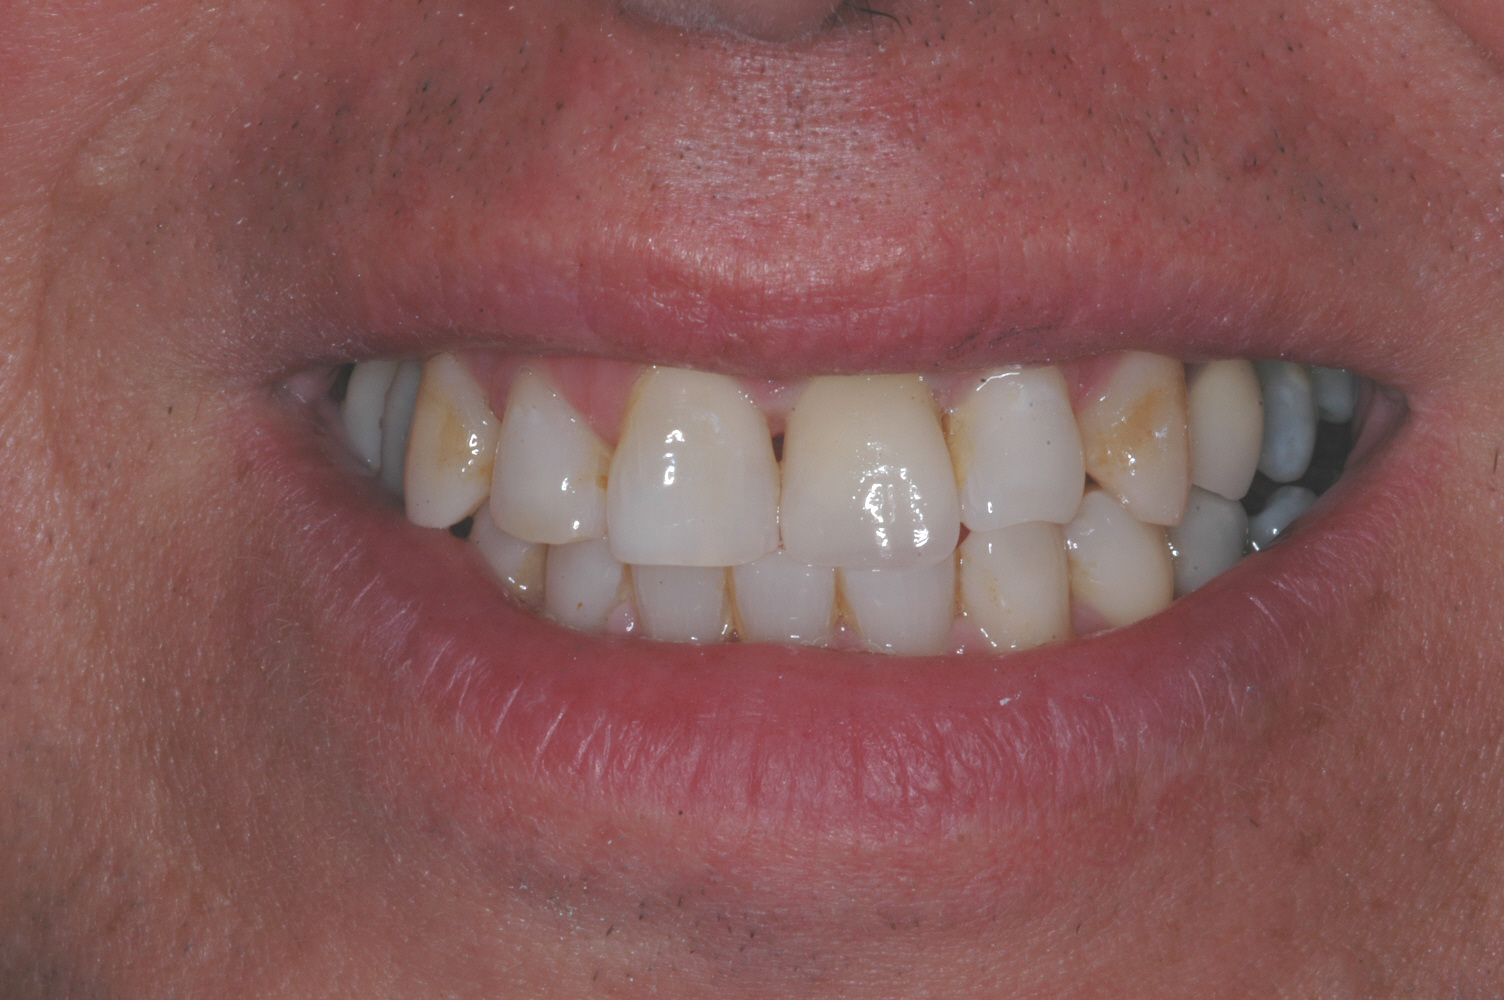  This is the final crown - today's crowns can be very esthetic and indiscernible from the natural teeth.&nbsp; 